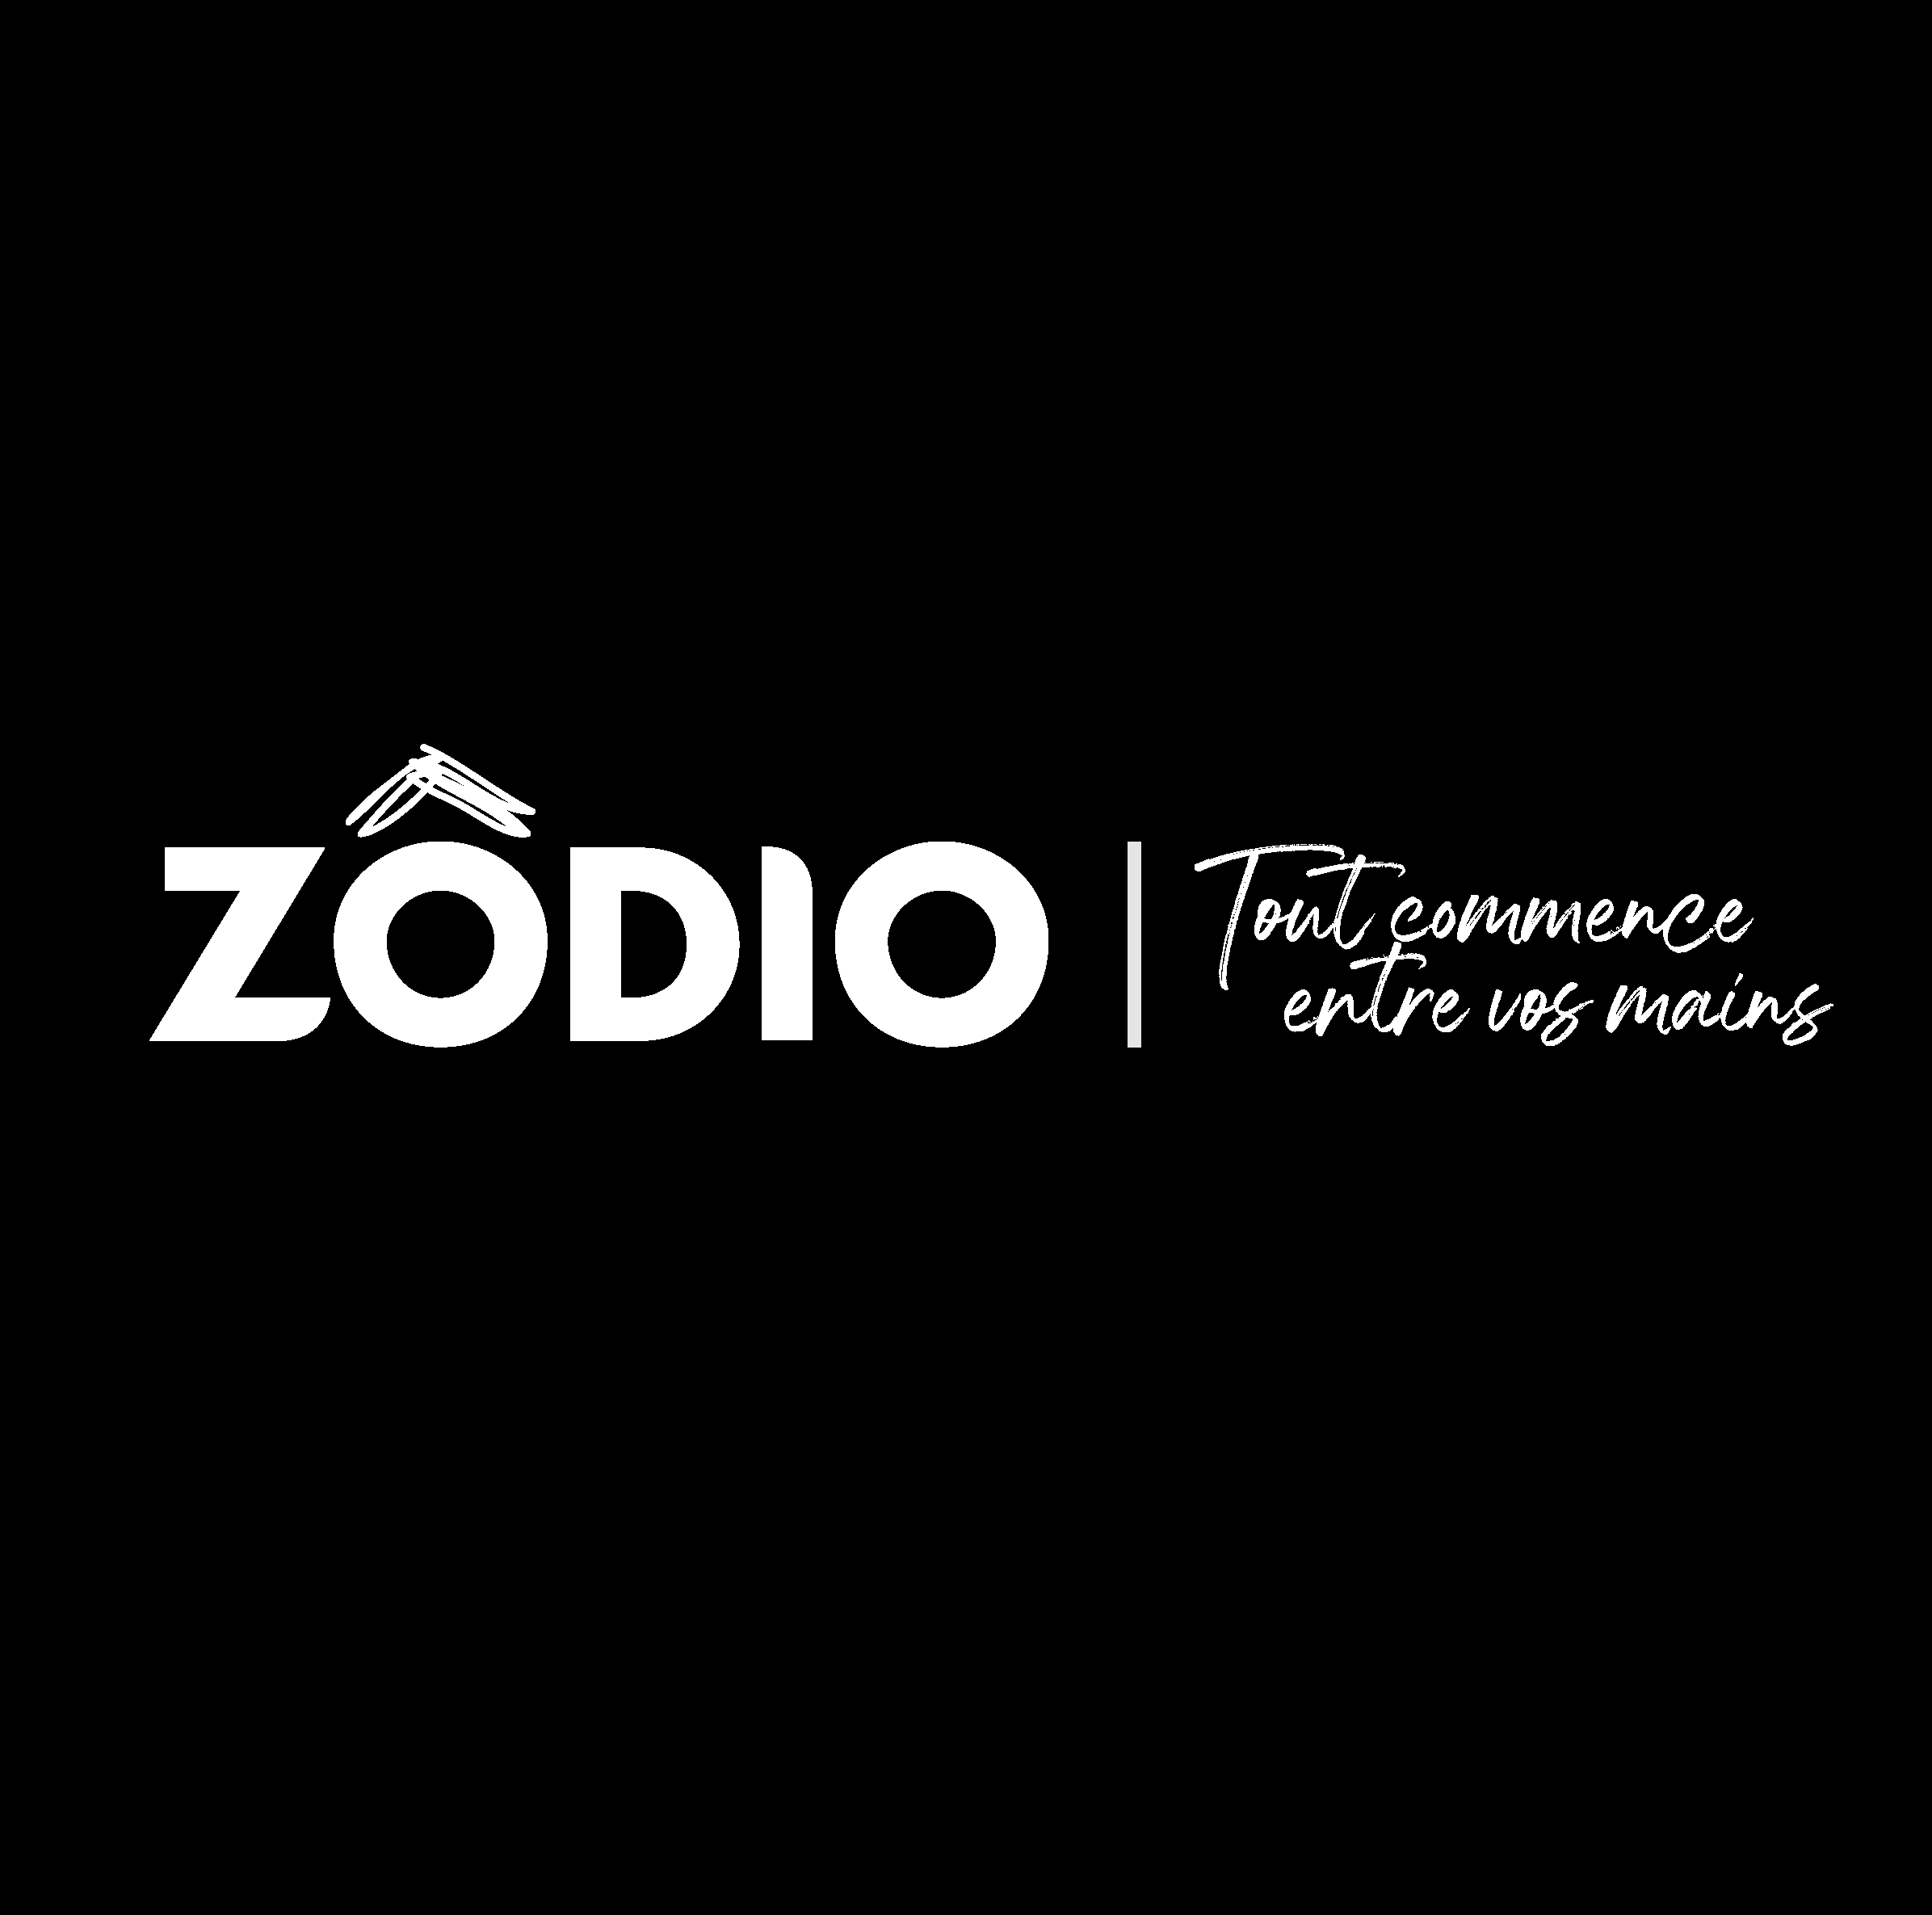 You are currently viewing Zodio